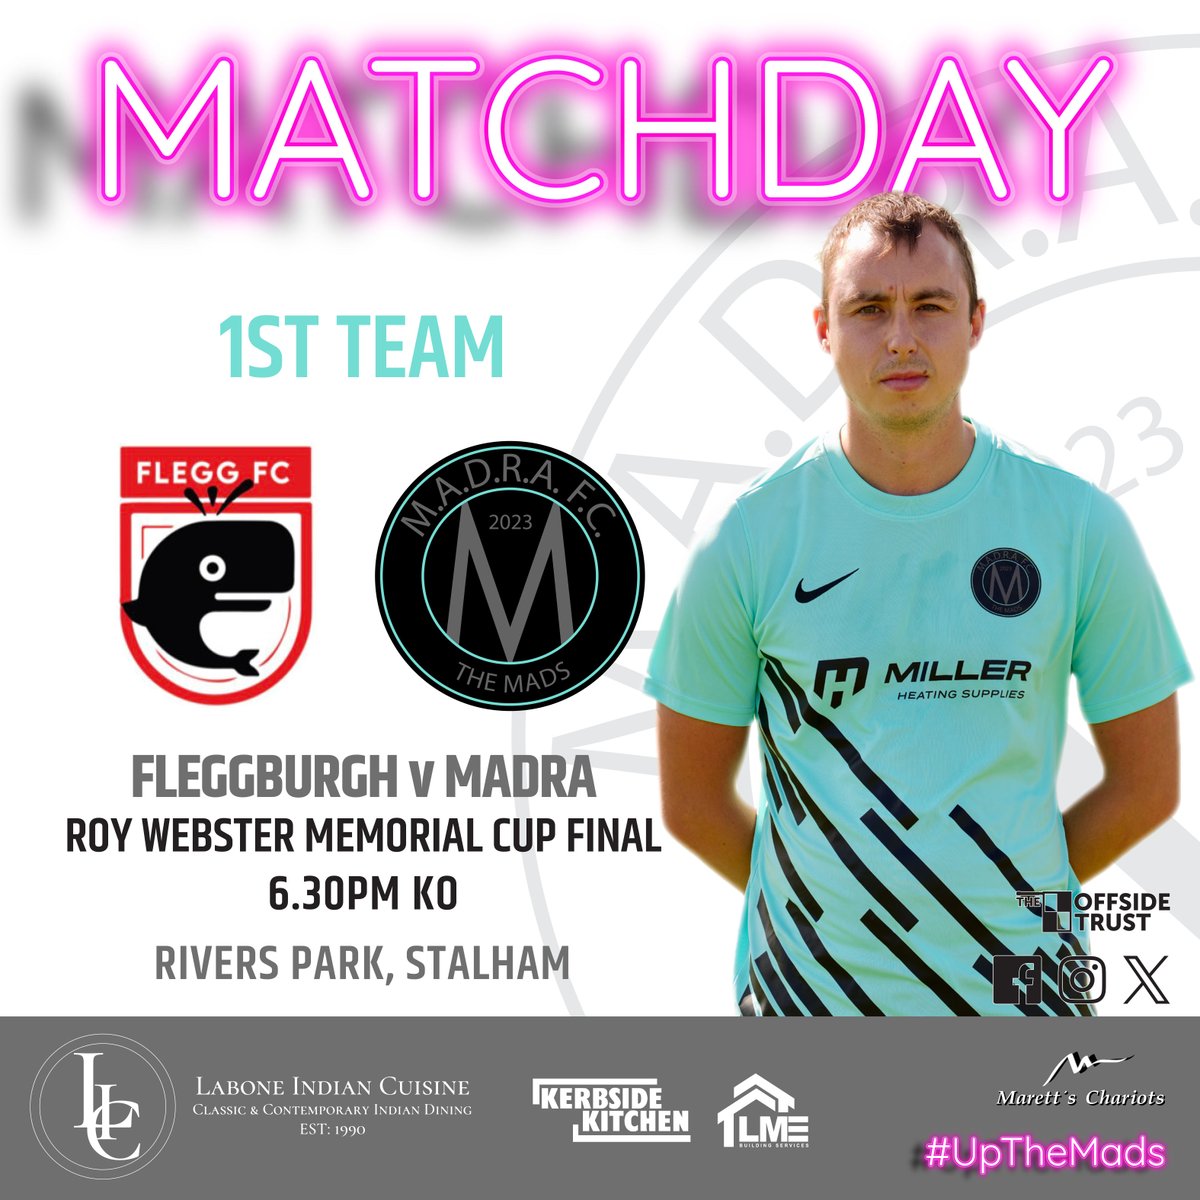 MATCHDAY!
1sts ending their season with the Roy Webster Memorial Cup final against @HoptonFc tonight!
Get down Rivers Park and cheer the lads on.
#UpTheMads #WelcomeToTheMadhouse #Madness #TheMads #MadraFC #NorfolkFootball #OneStepBeyond